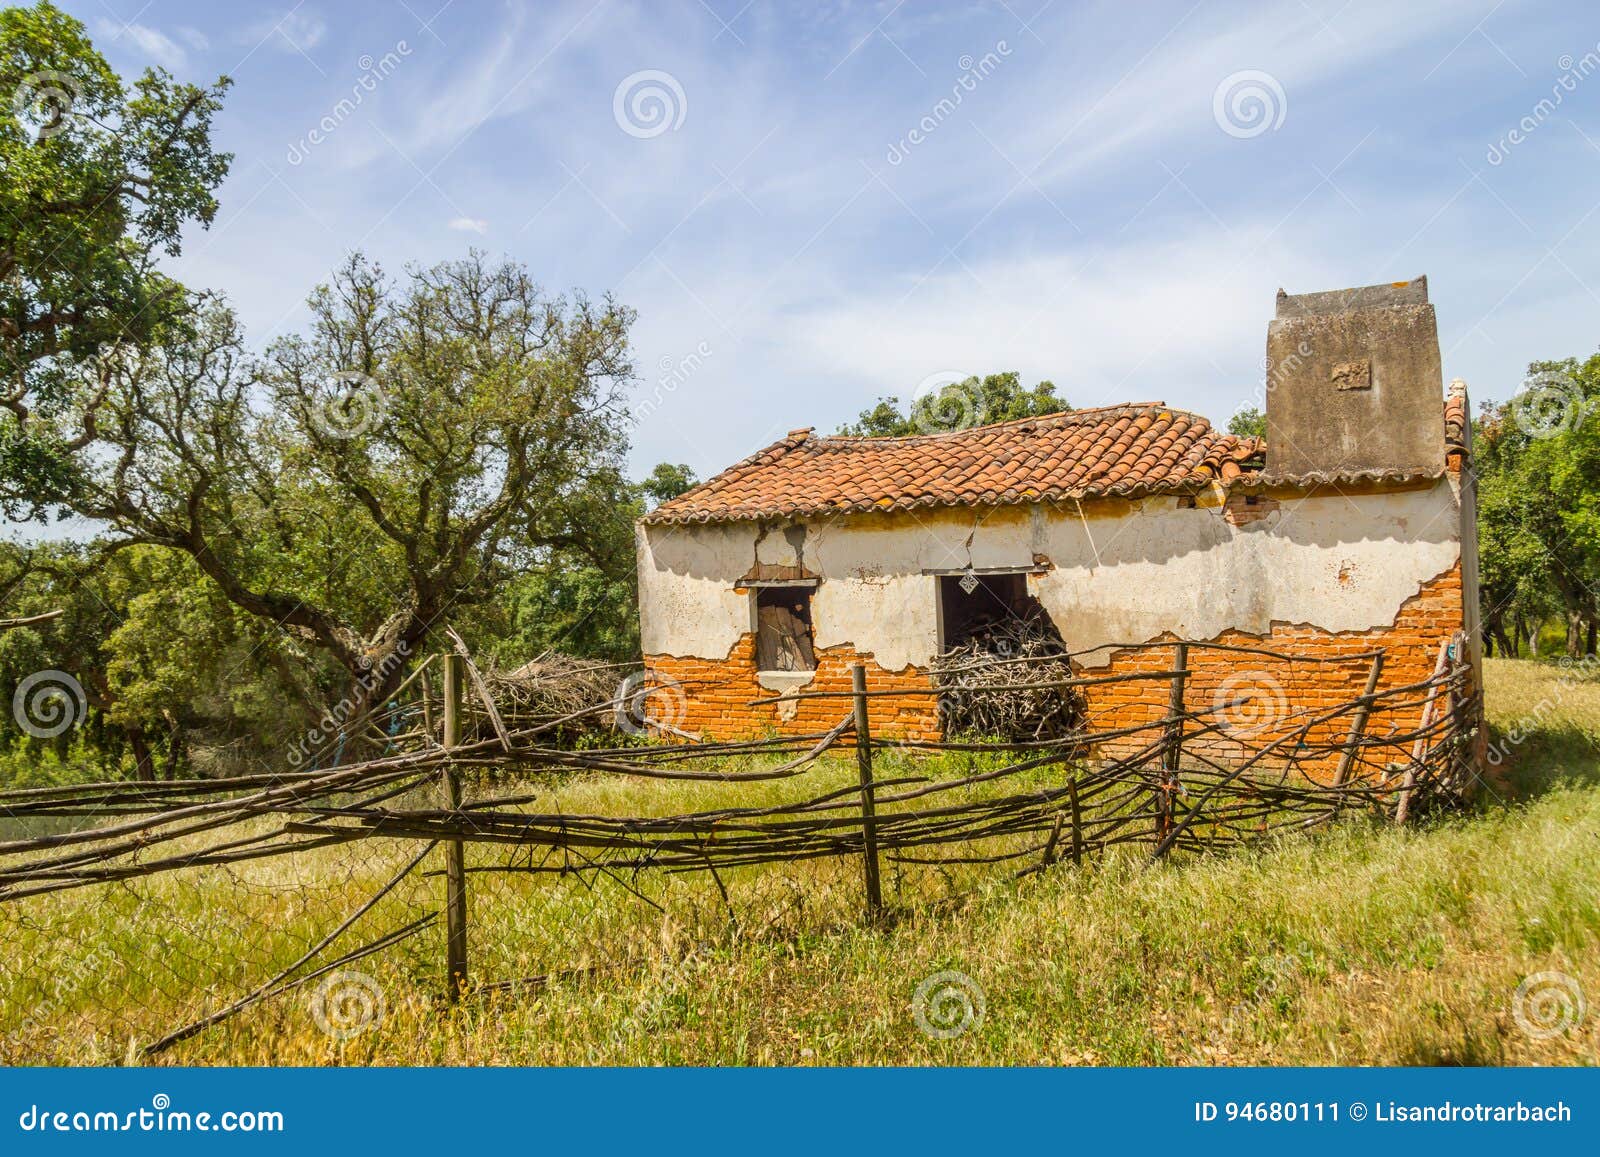 ruins of a farm house and cork tree in santiago do cacem